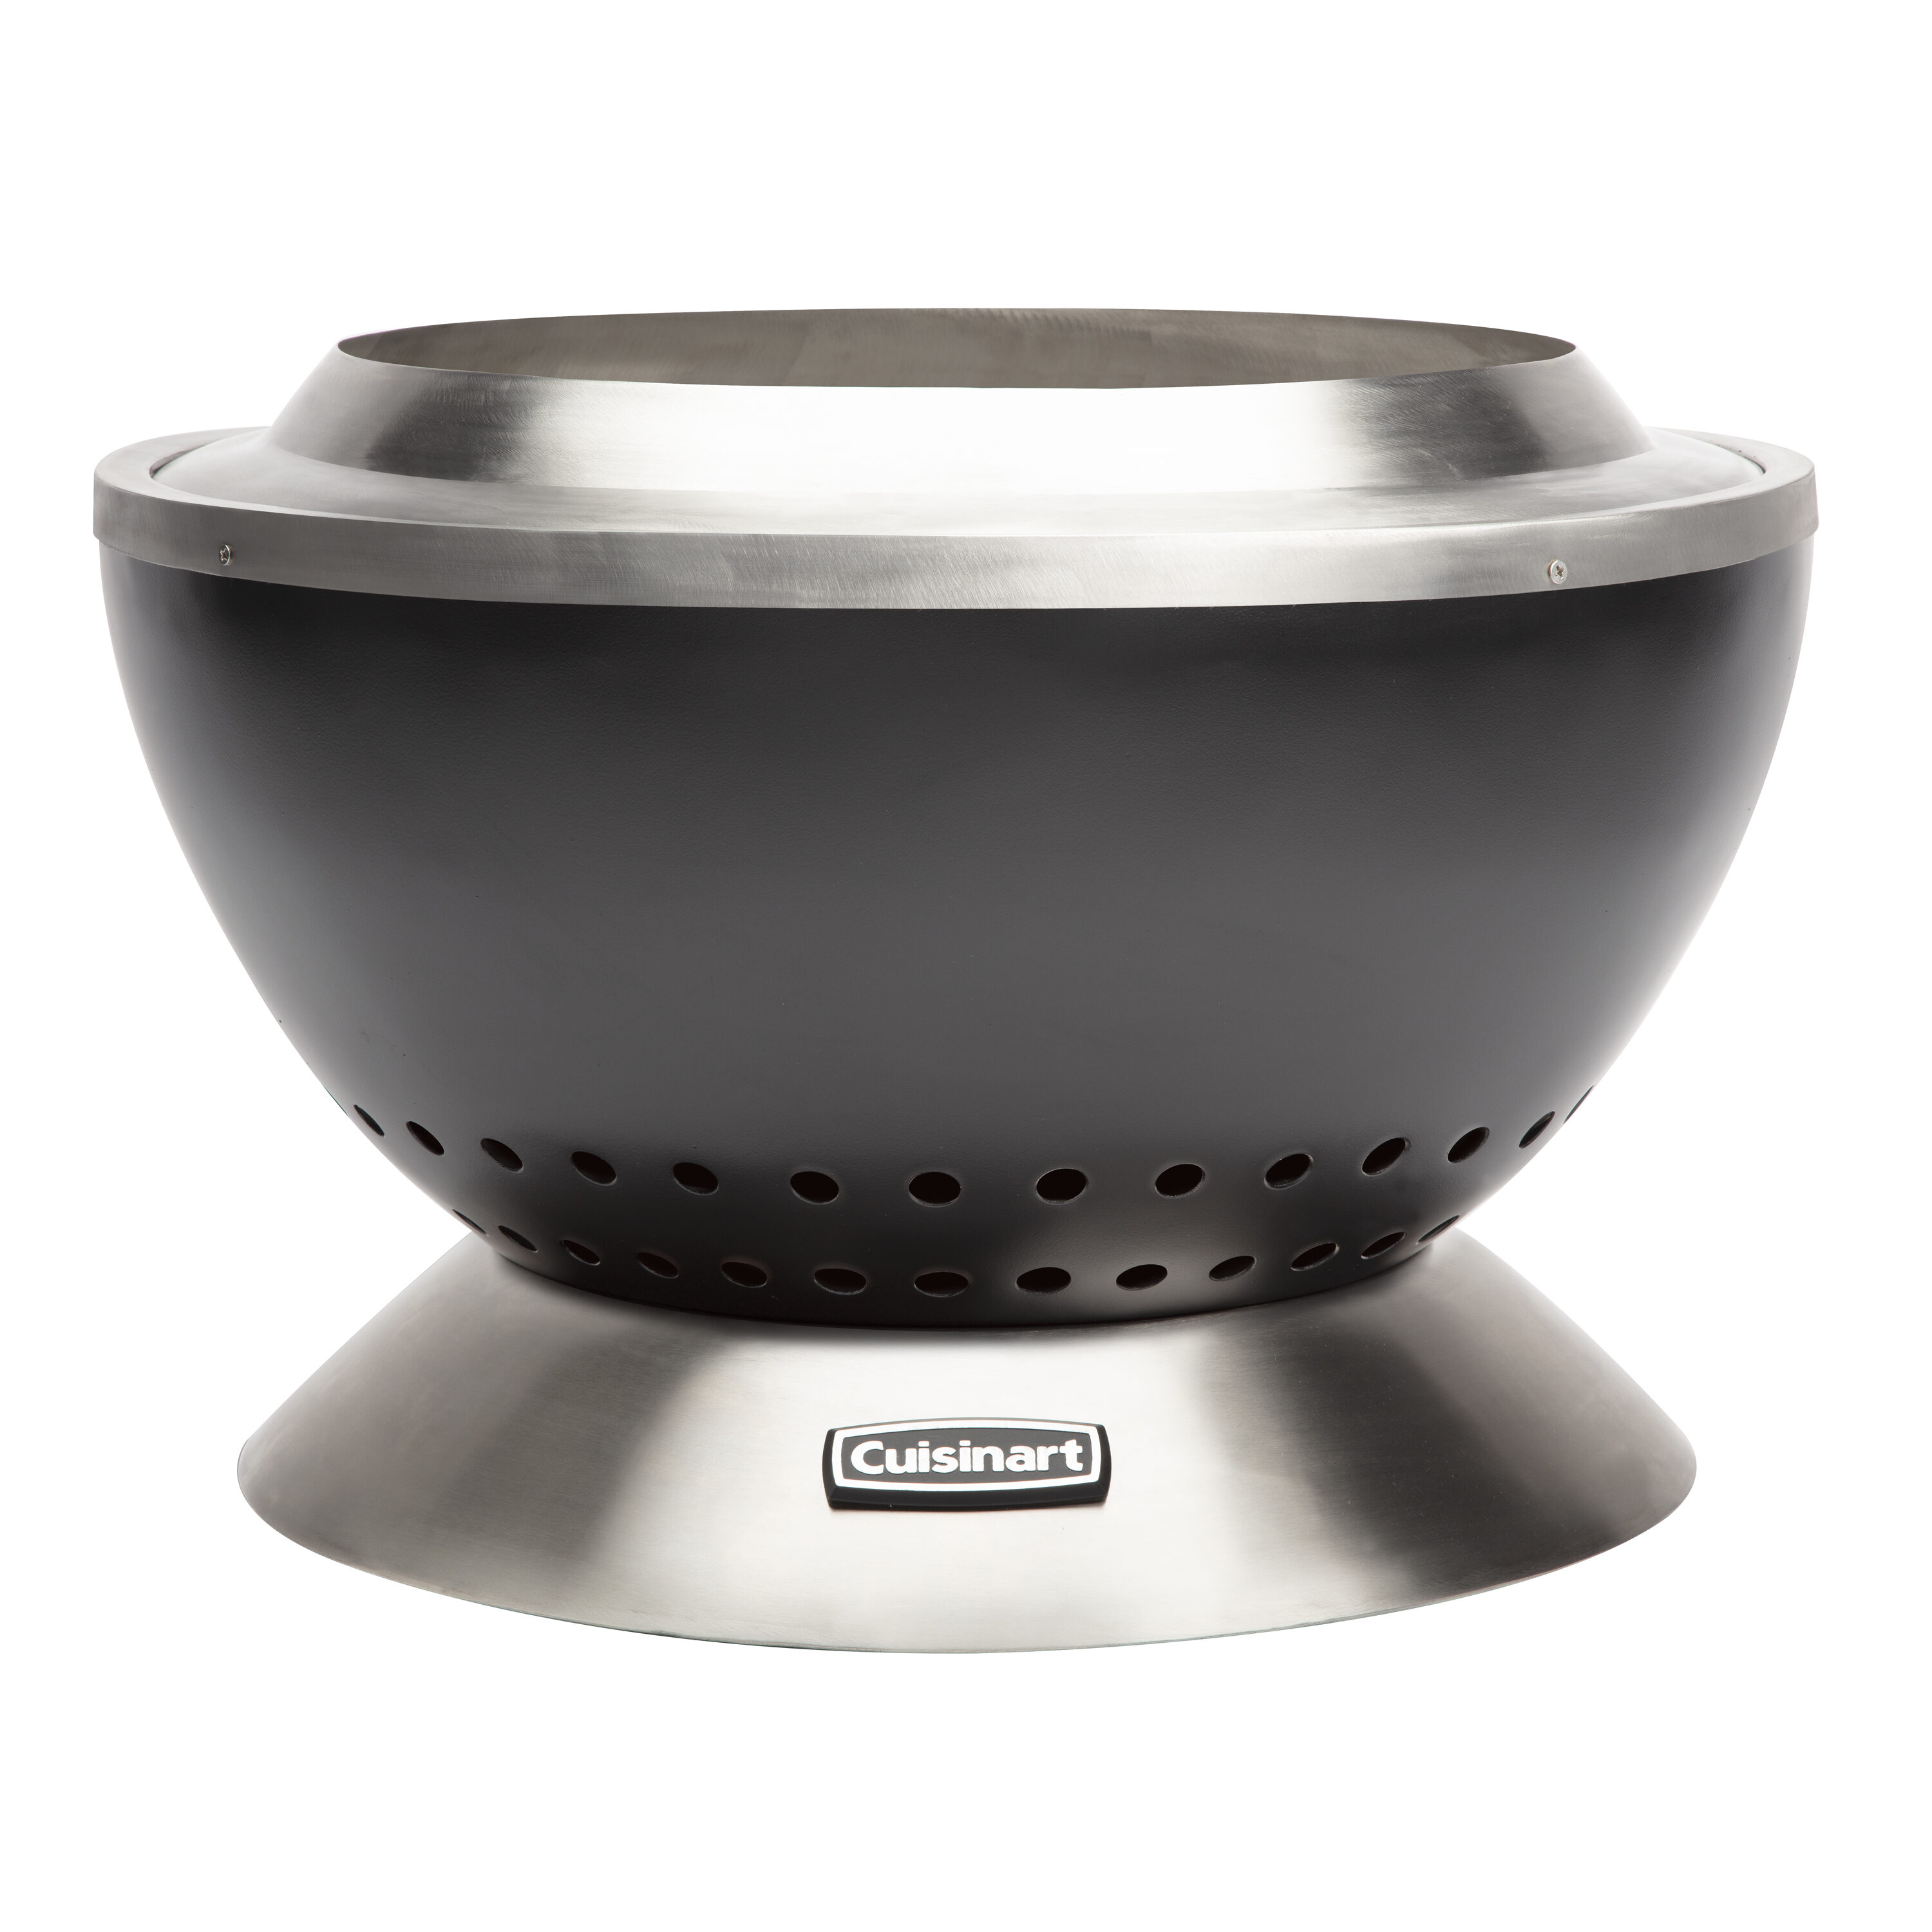 Cuisinart Multi-Purpose 5.5 Qt Stainless Steel Bowl With Handles No Lid